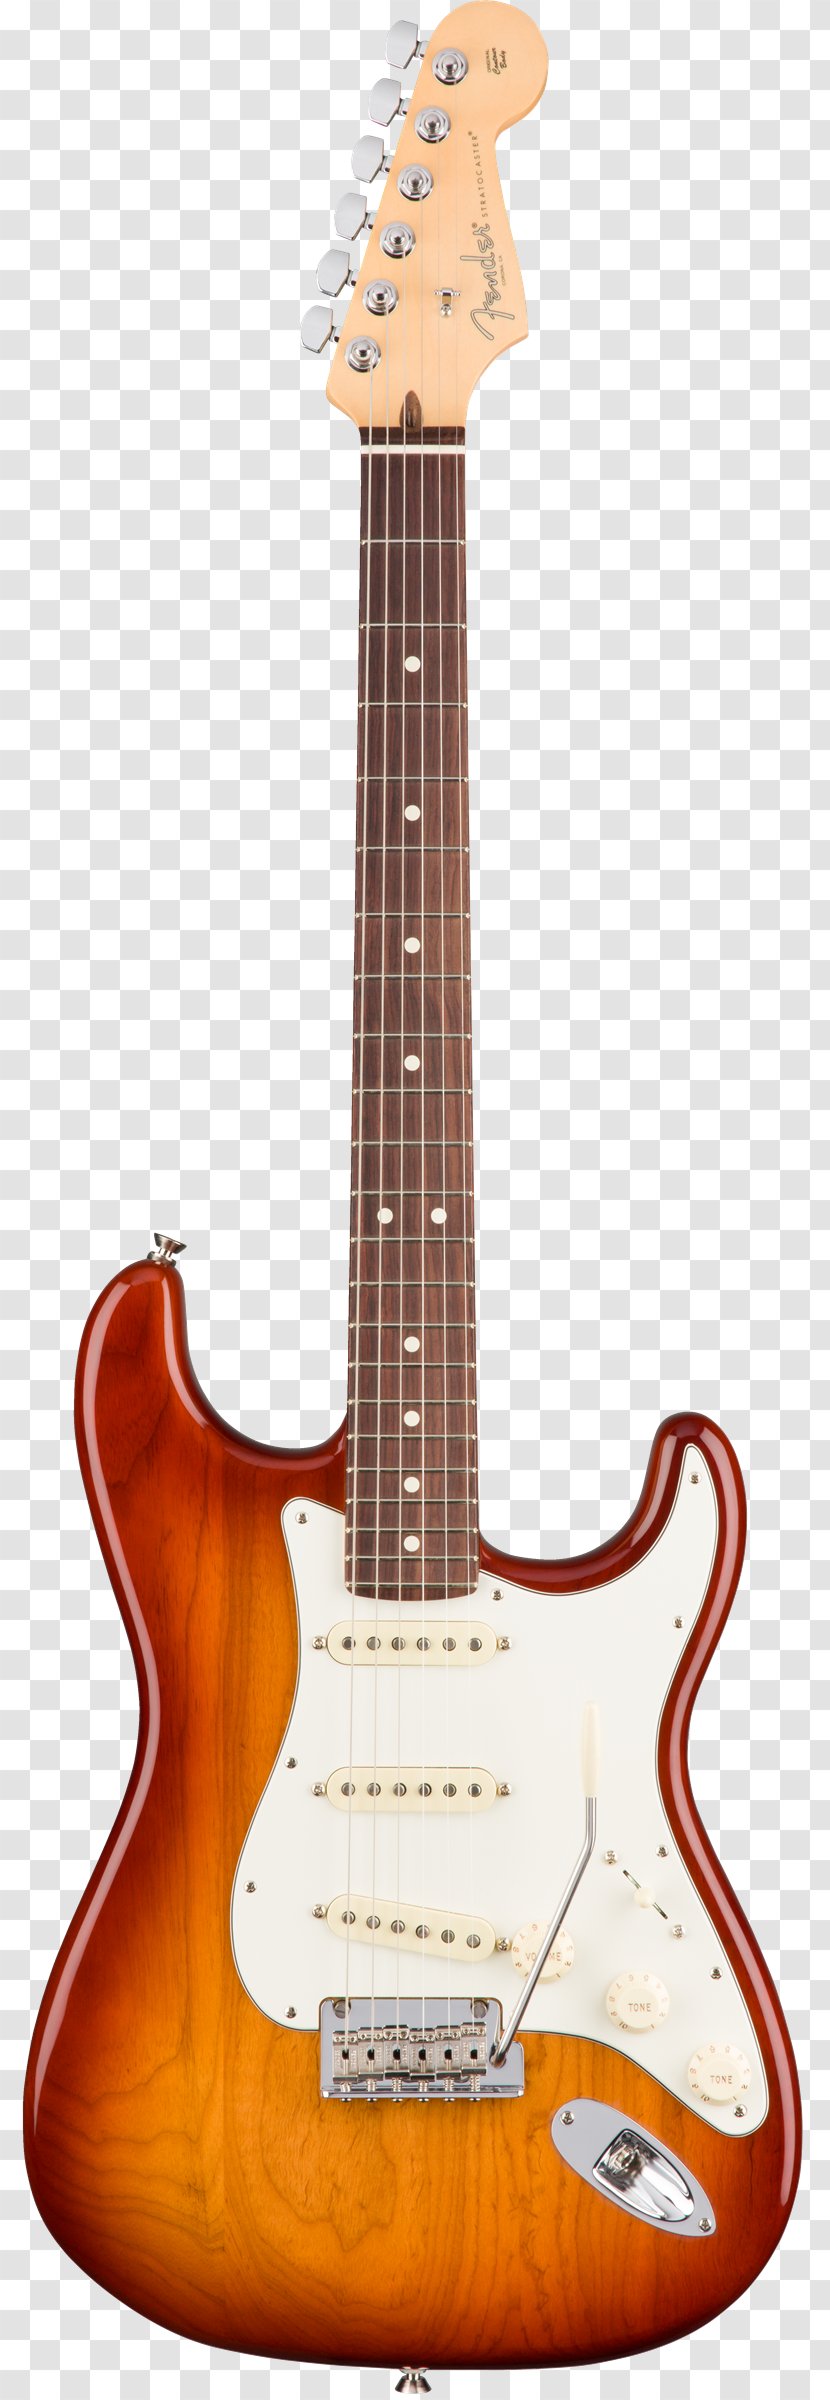 Fender Stratocaster Musical Instruments Corporation Electric Guitar Bullet American Deluxe Series - Bass Transparent PNG